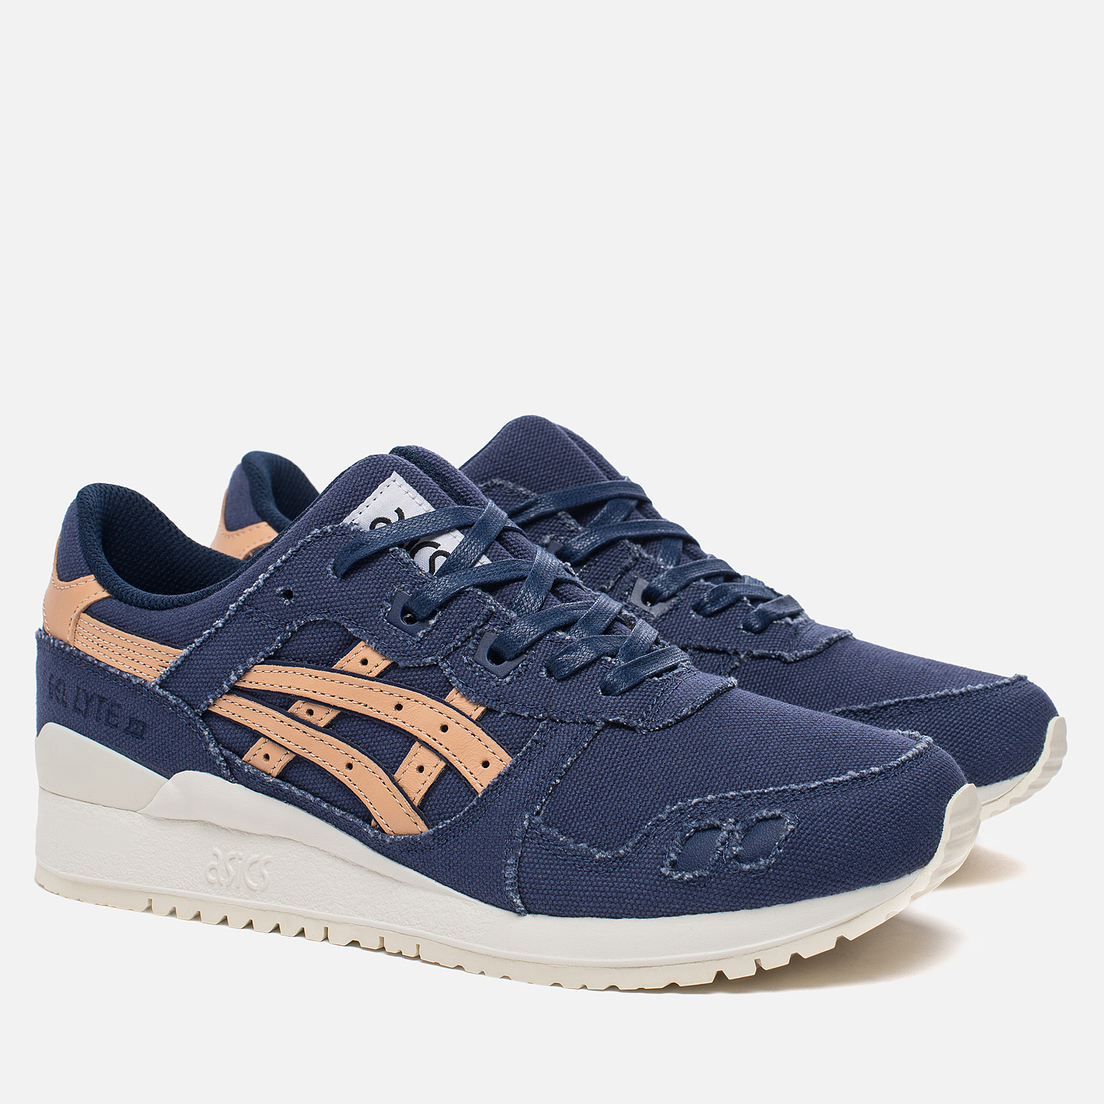 ASICS Кроссовки Gel-Lyte III Canvas Tote Pack